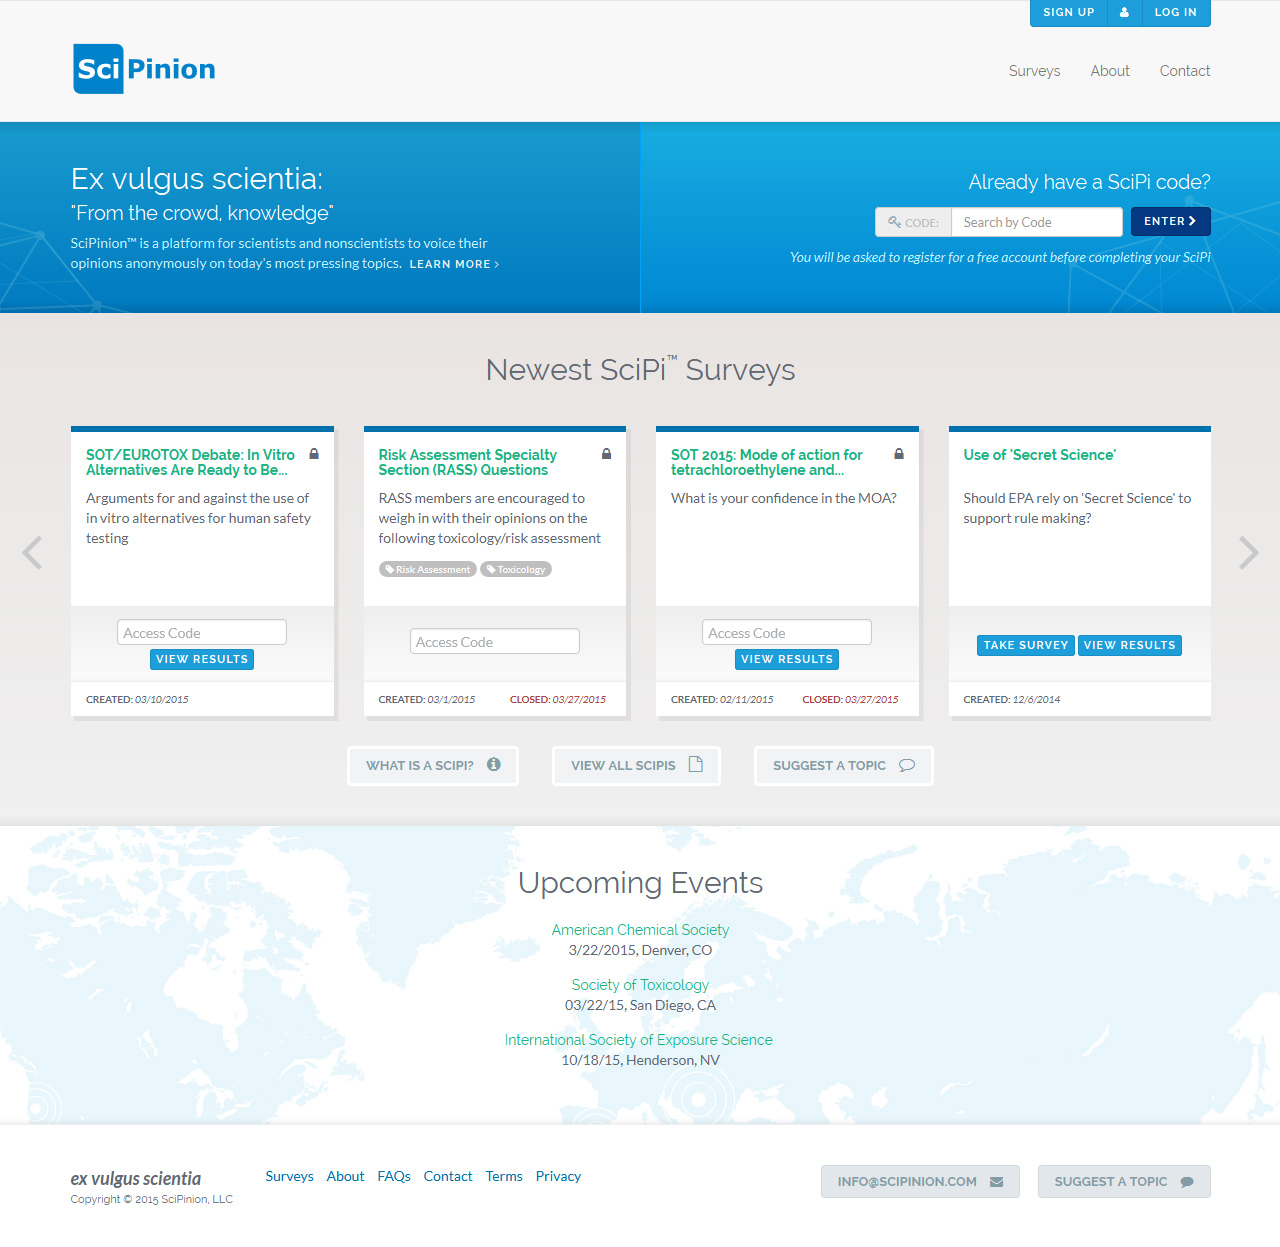 Homepage, featuring latest surveys and quick access search bar